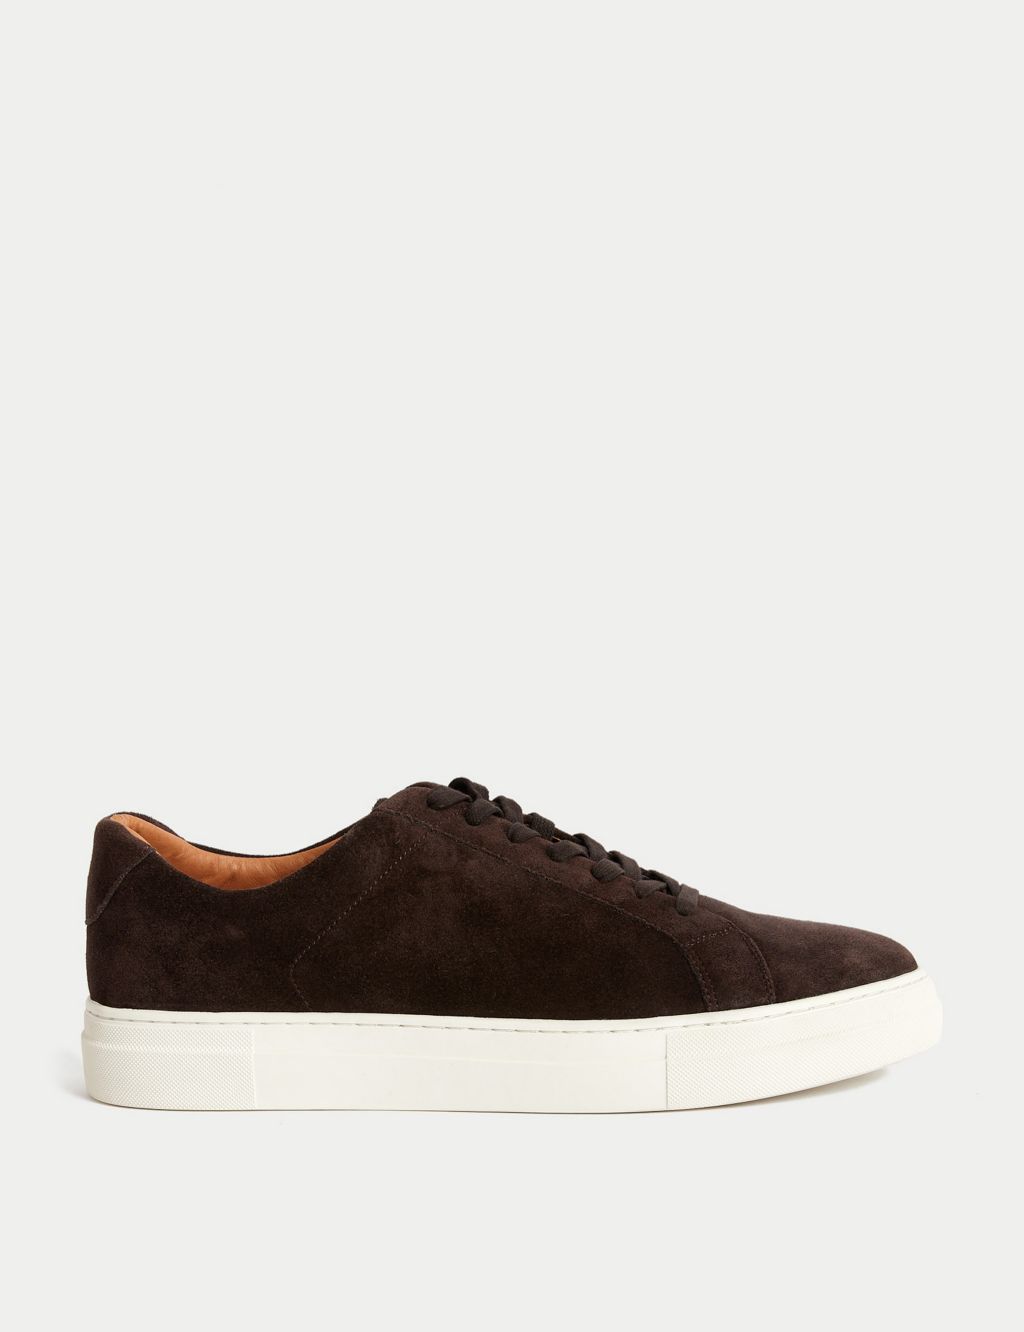 Suede Lace Up Trainers image 1